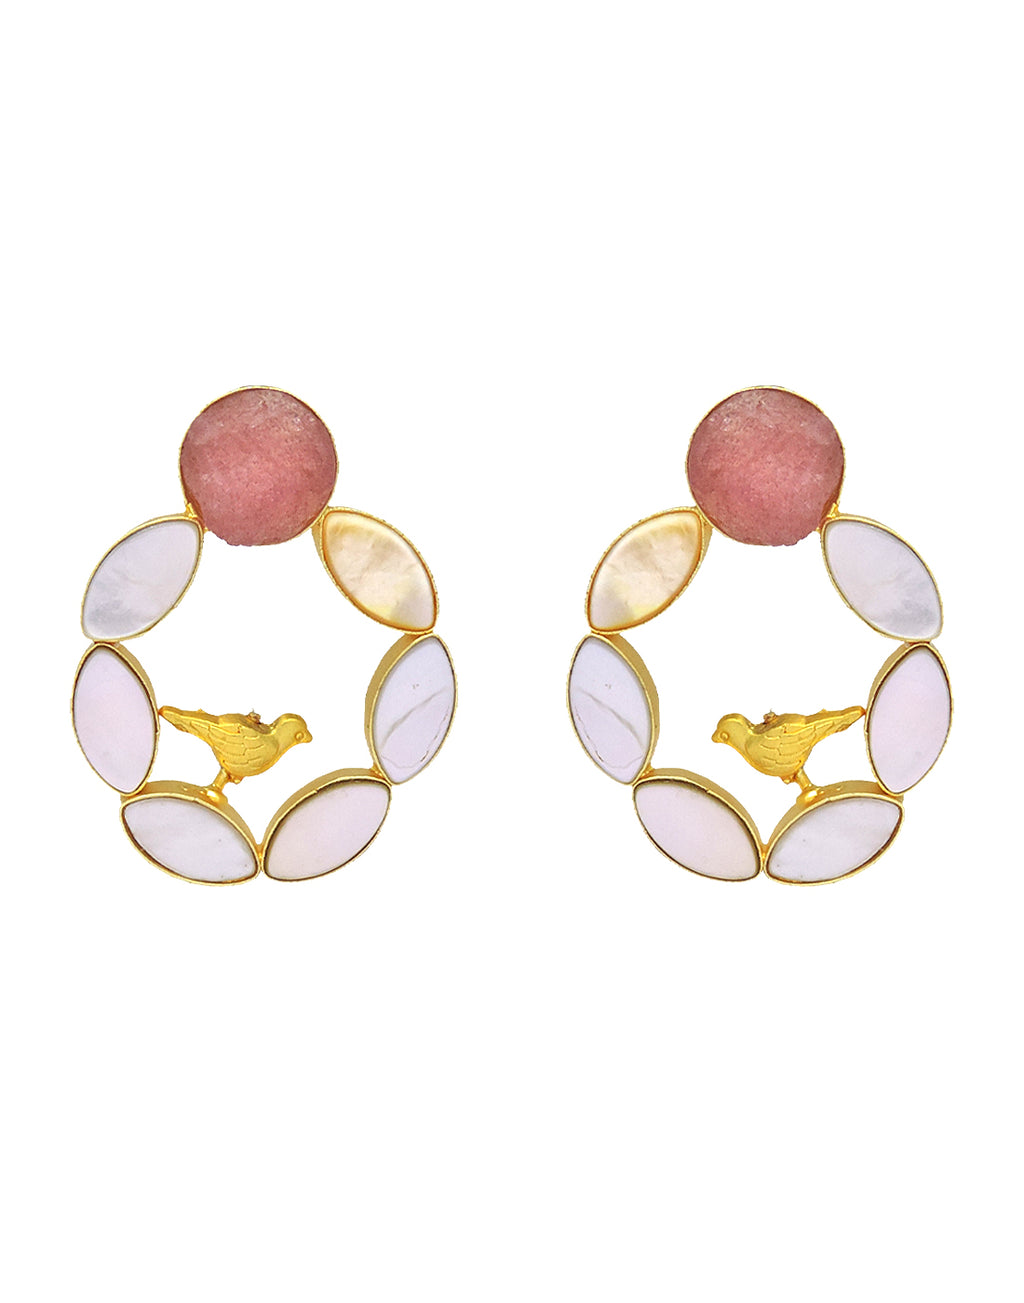 Pearl Cage Earrings (Quartz) - Statement Earrings - Gold-Plated & Hypoallergenic - Made in India - Dubai Jewellery - Dori